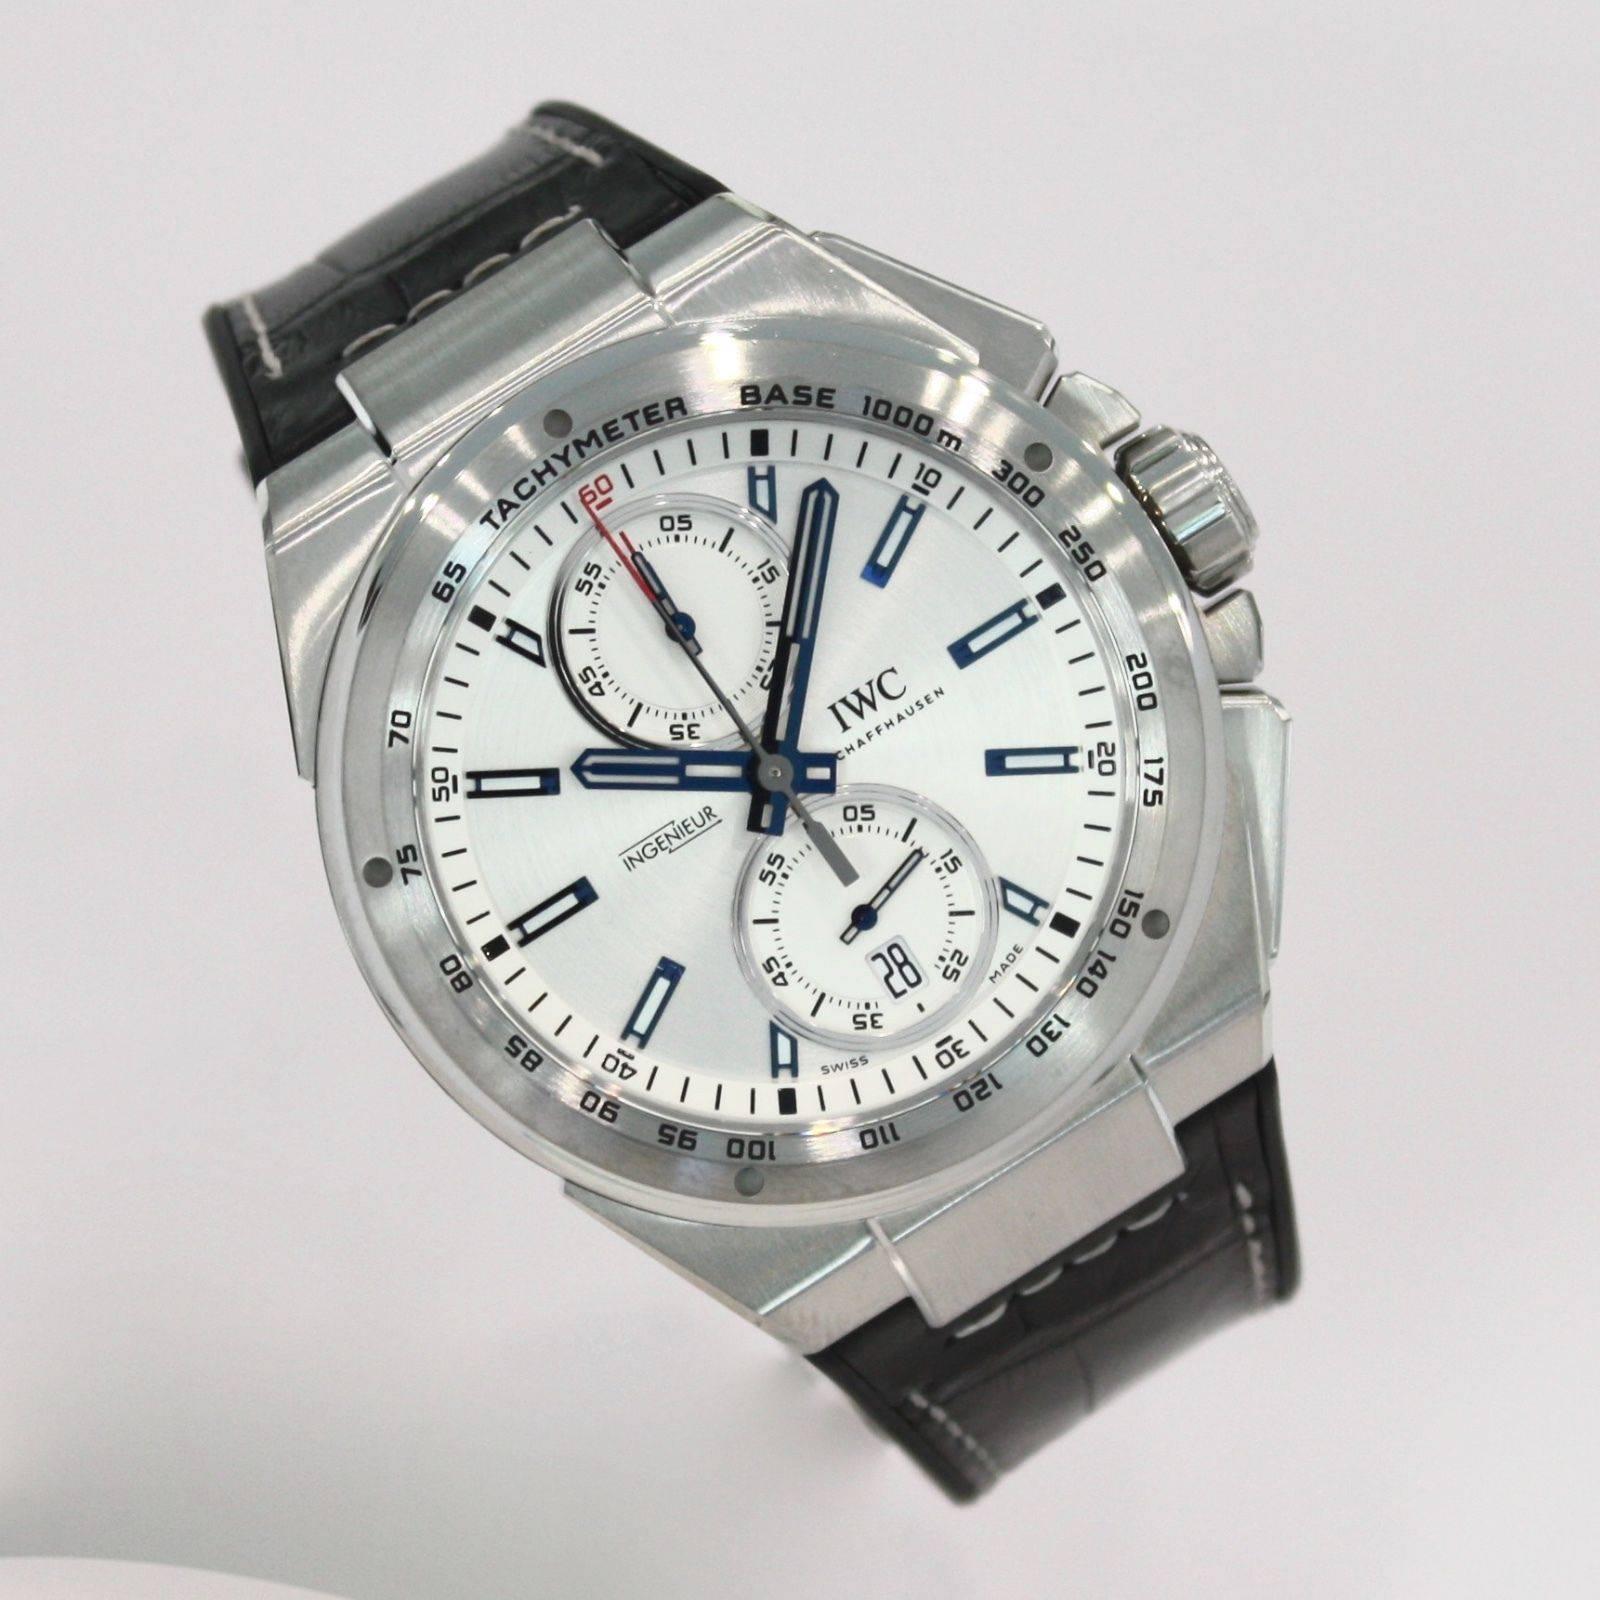 Men's IWC Ingenieur Stainless Steel Chronograph Racer Automatic Wristwatch